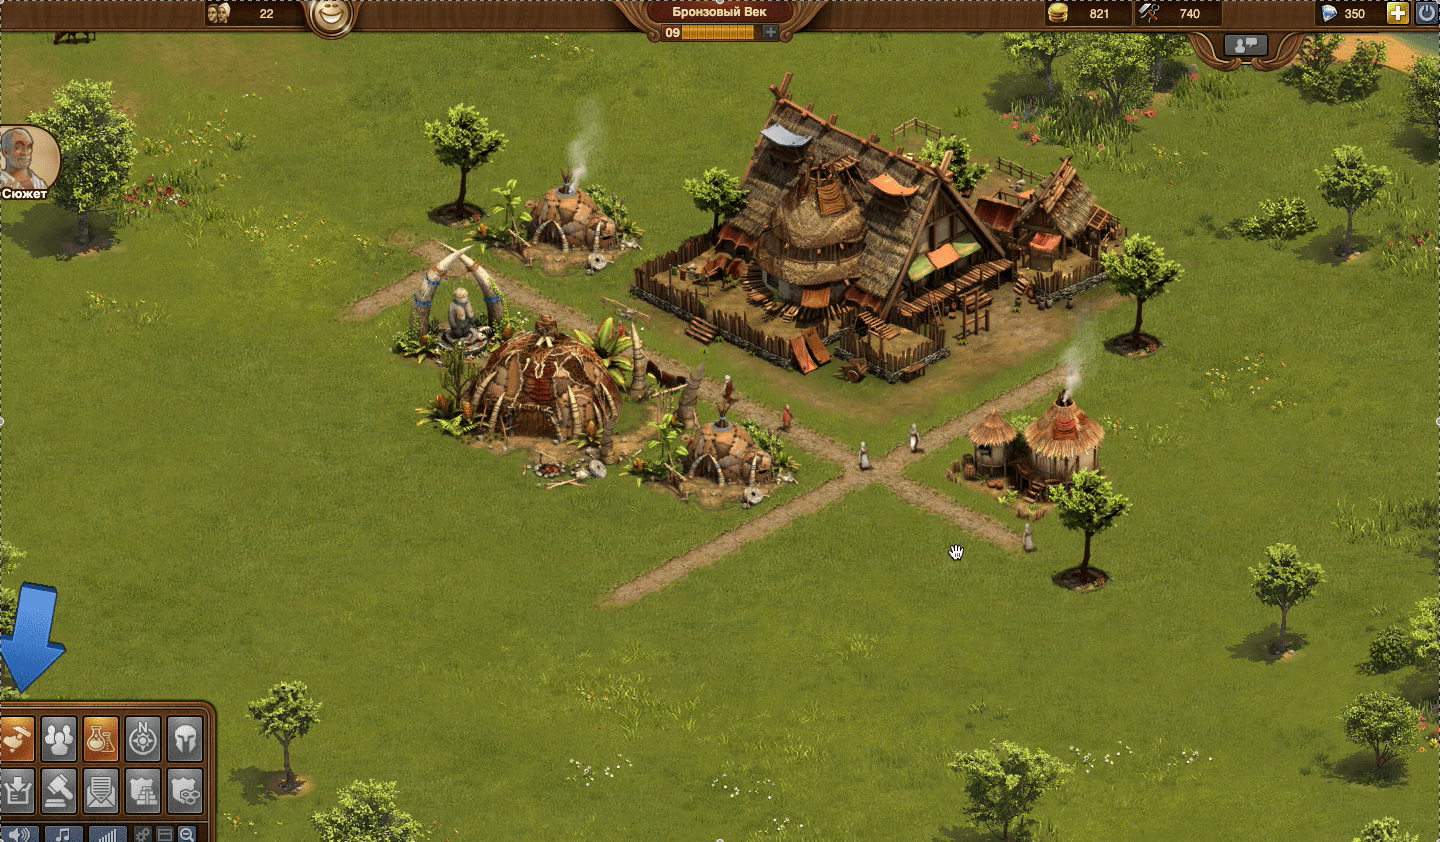 Forge of Empires Screenshot 5